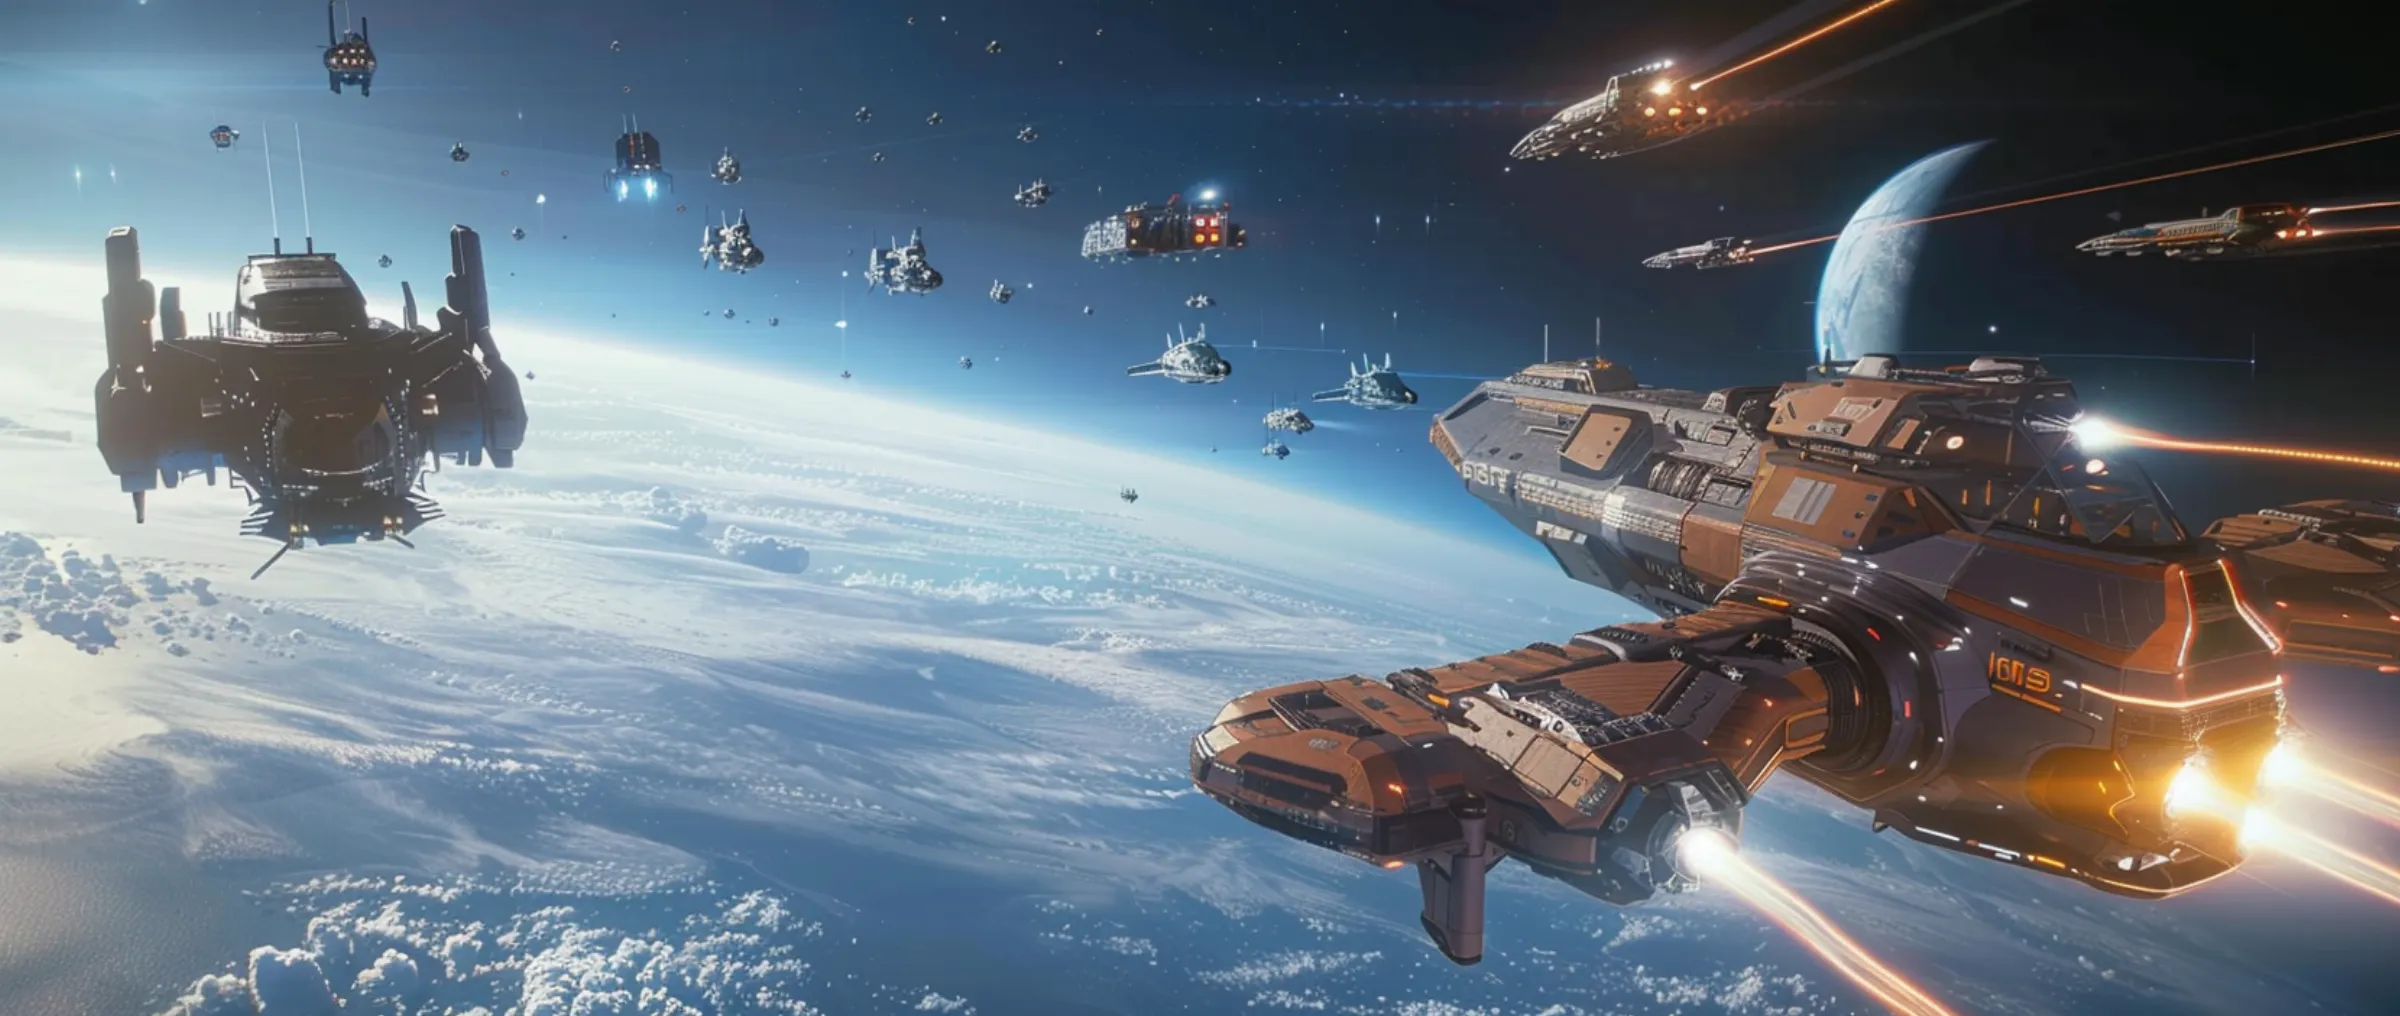 Space Nation reveals details of the closed beta test